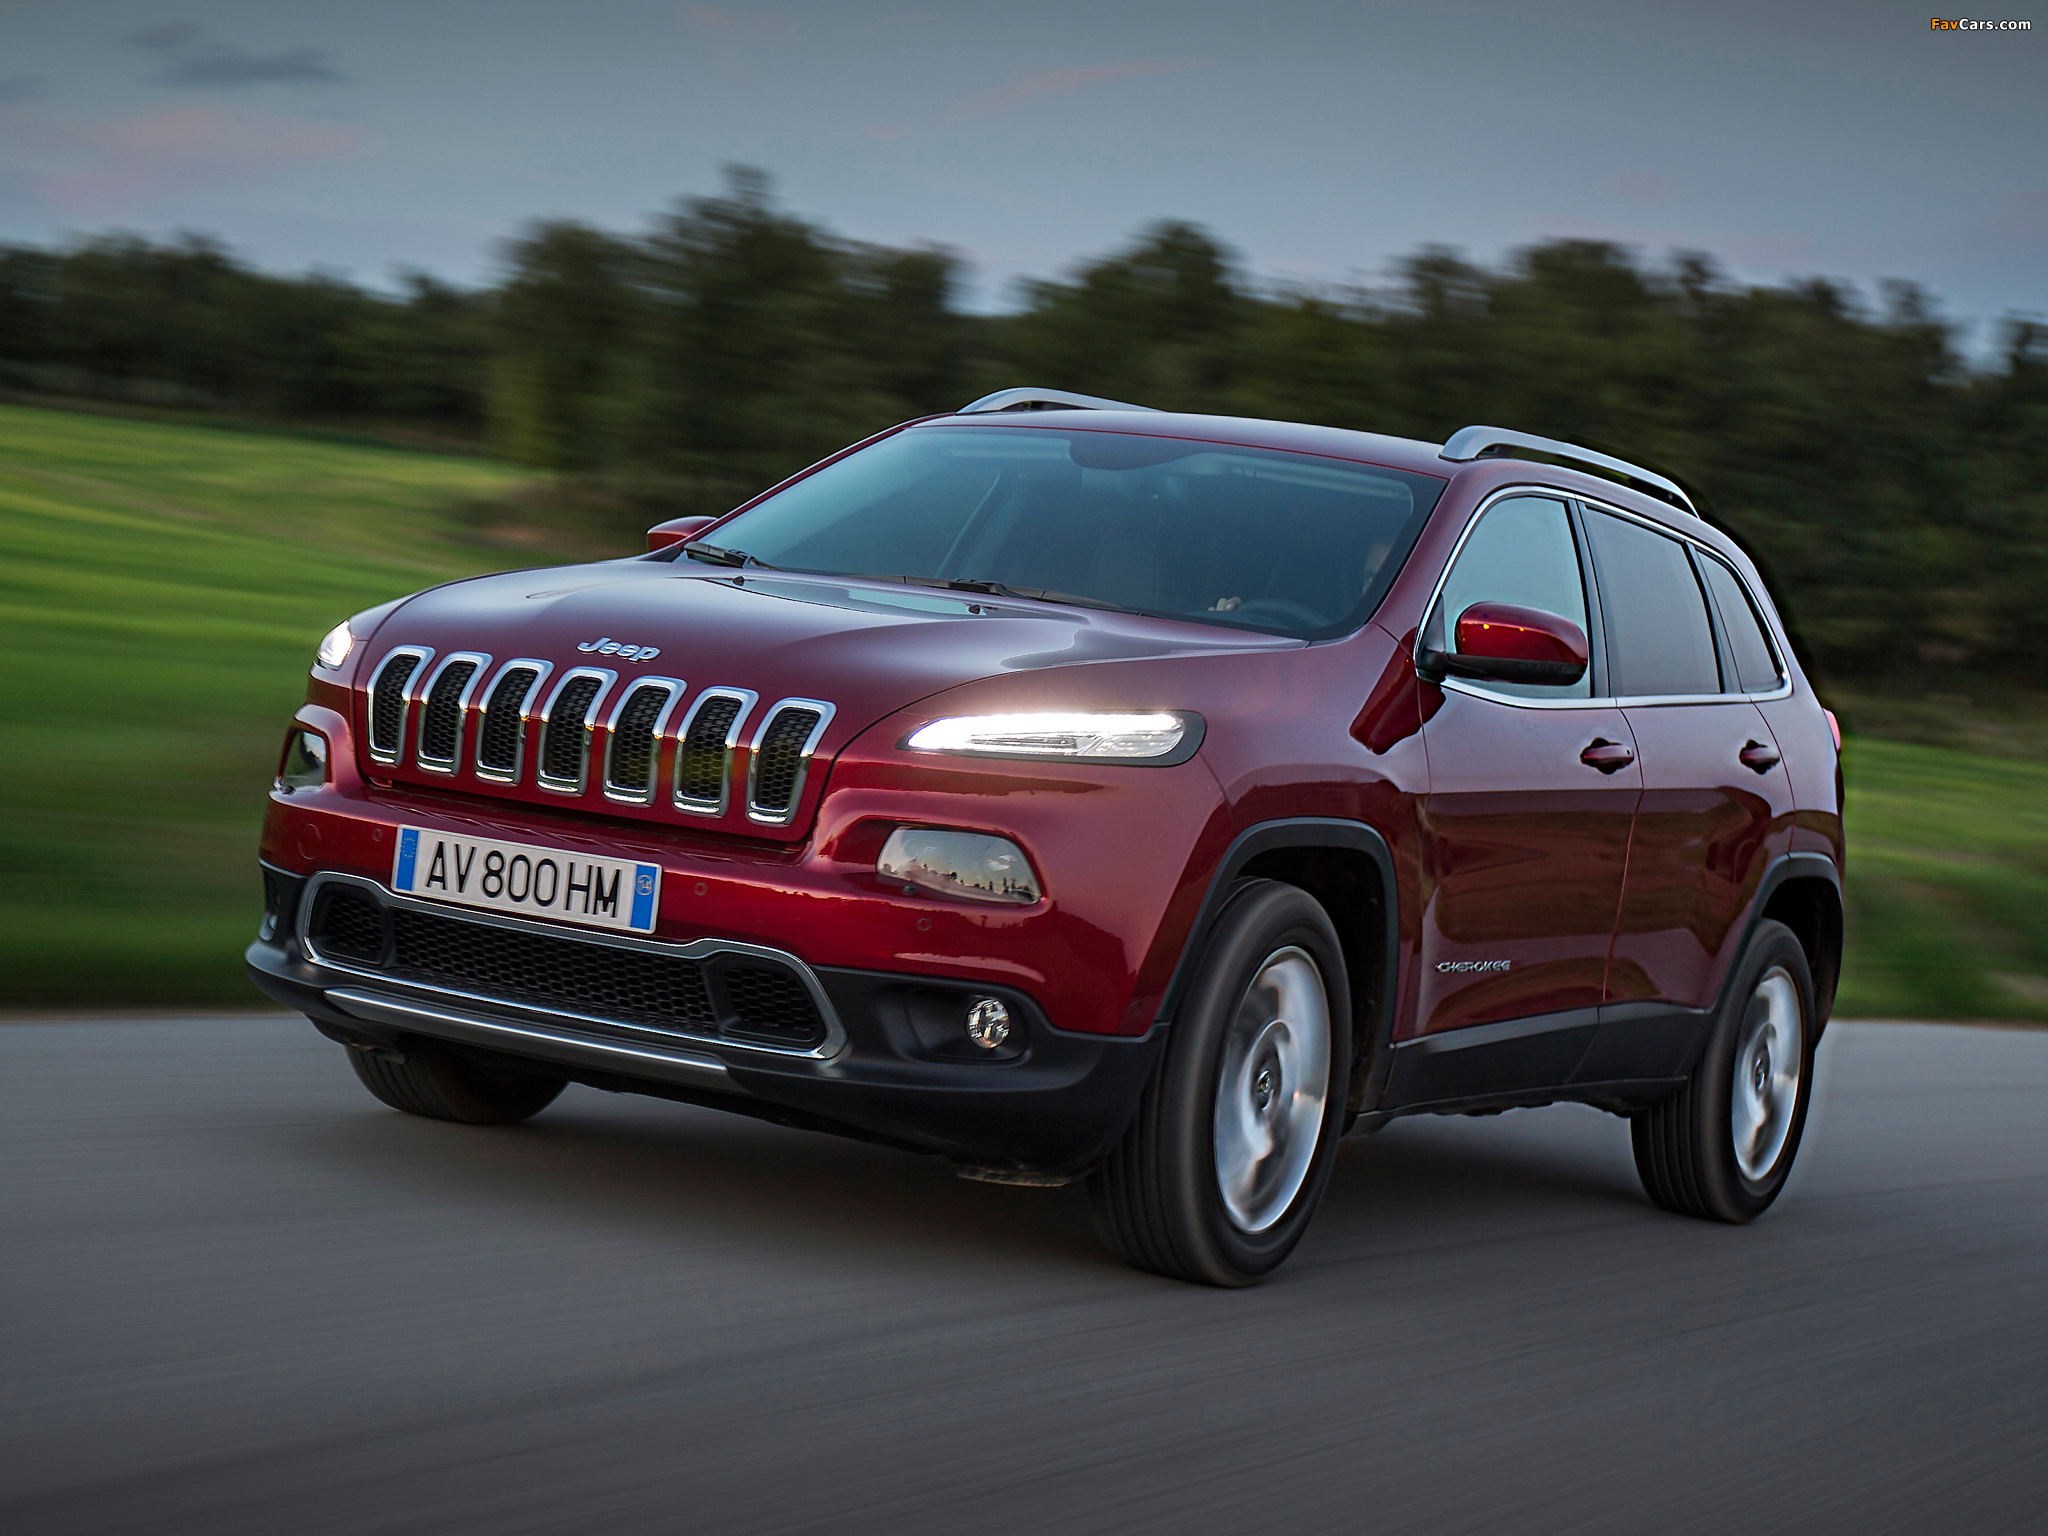 Jeep Cherokee Limited EUspec (KL) 2014 pictures (2048x1536)